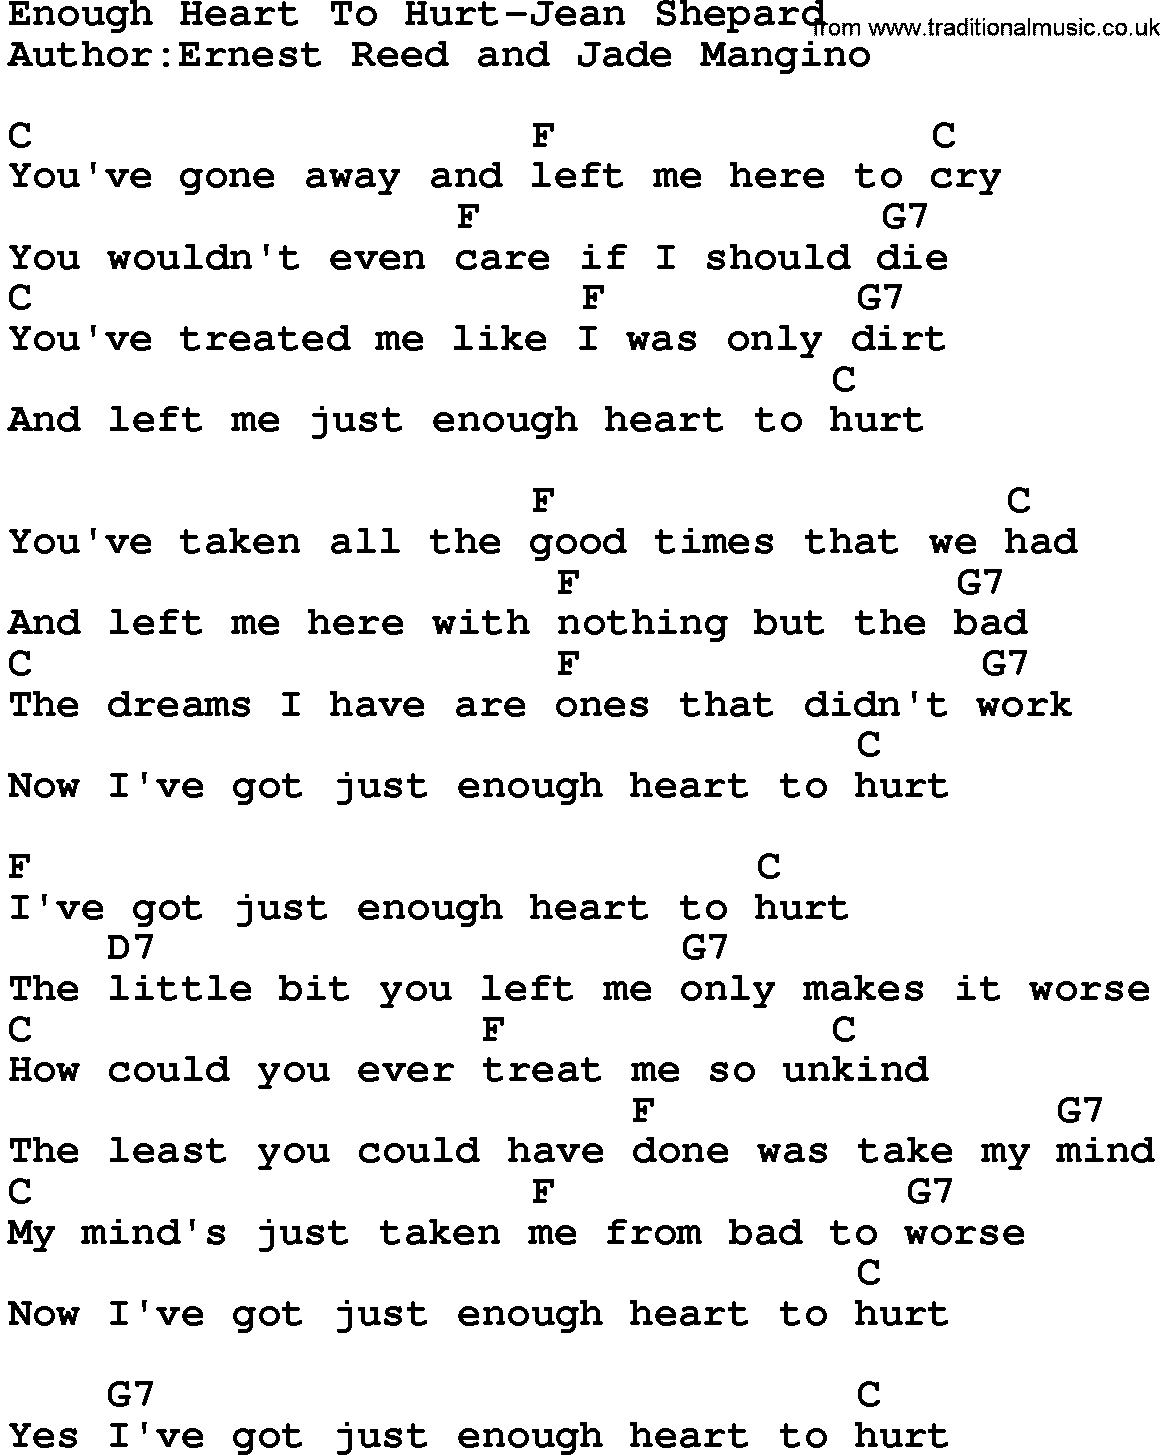 Country music song: Enough Heart To Hurt-Jean Shepard lyrics and chords